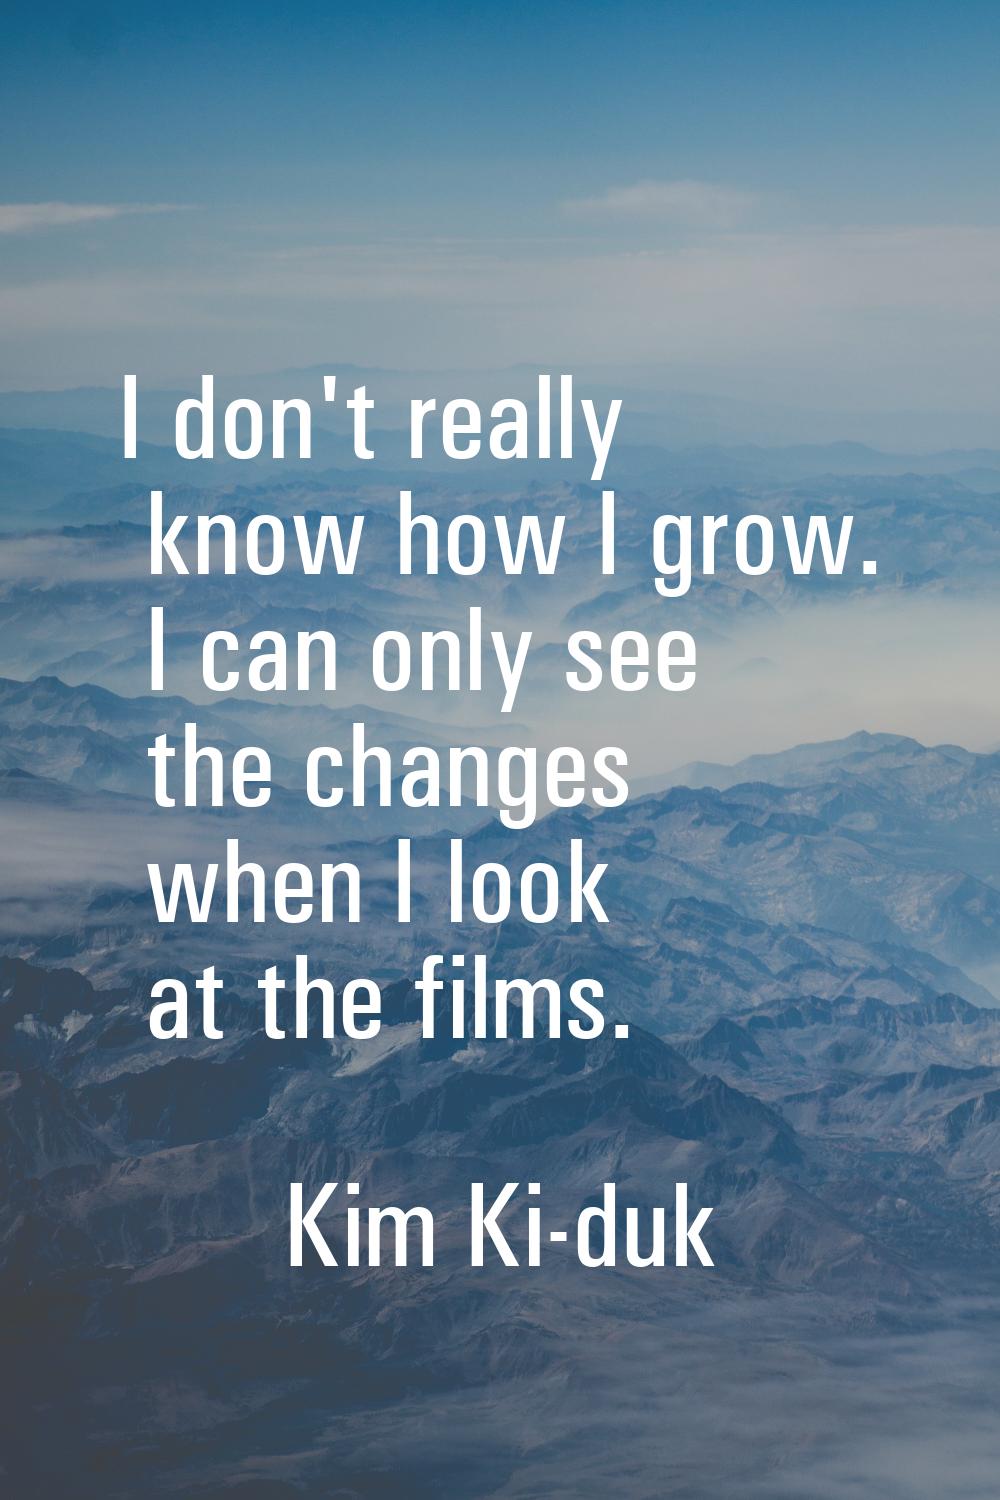 I don't really know how I grow. I can only see the changes when I look at the films.